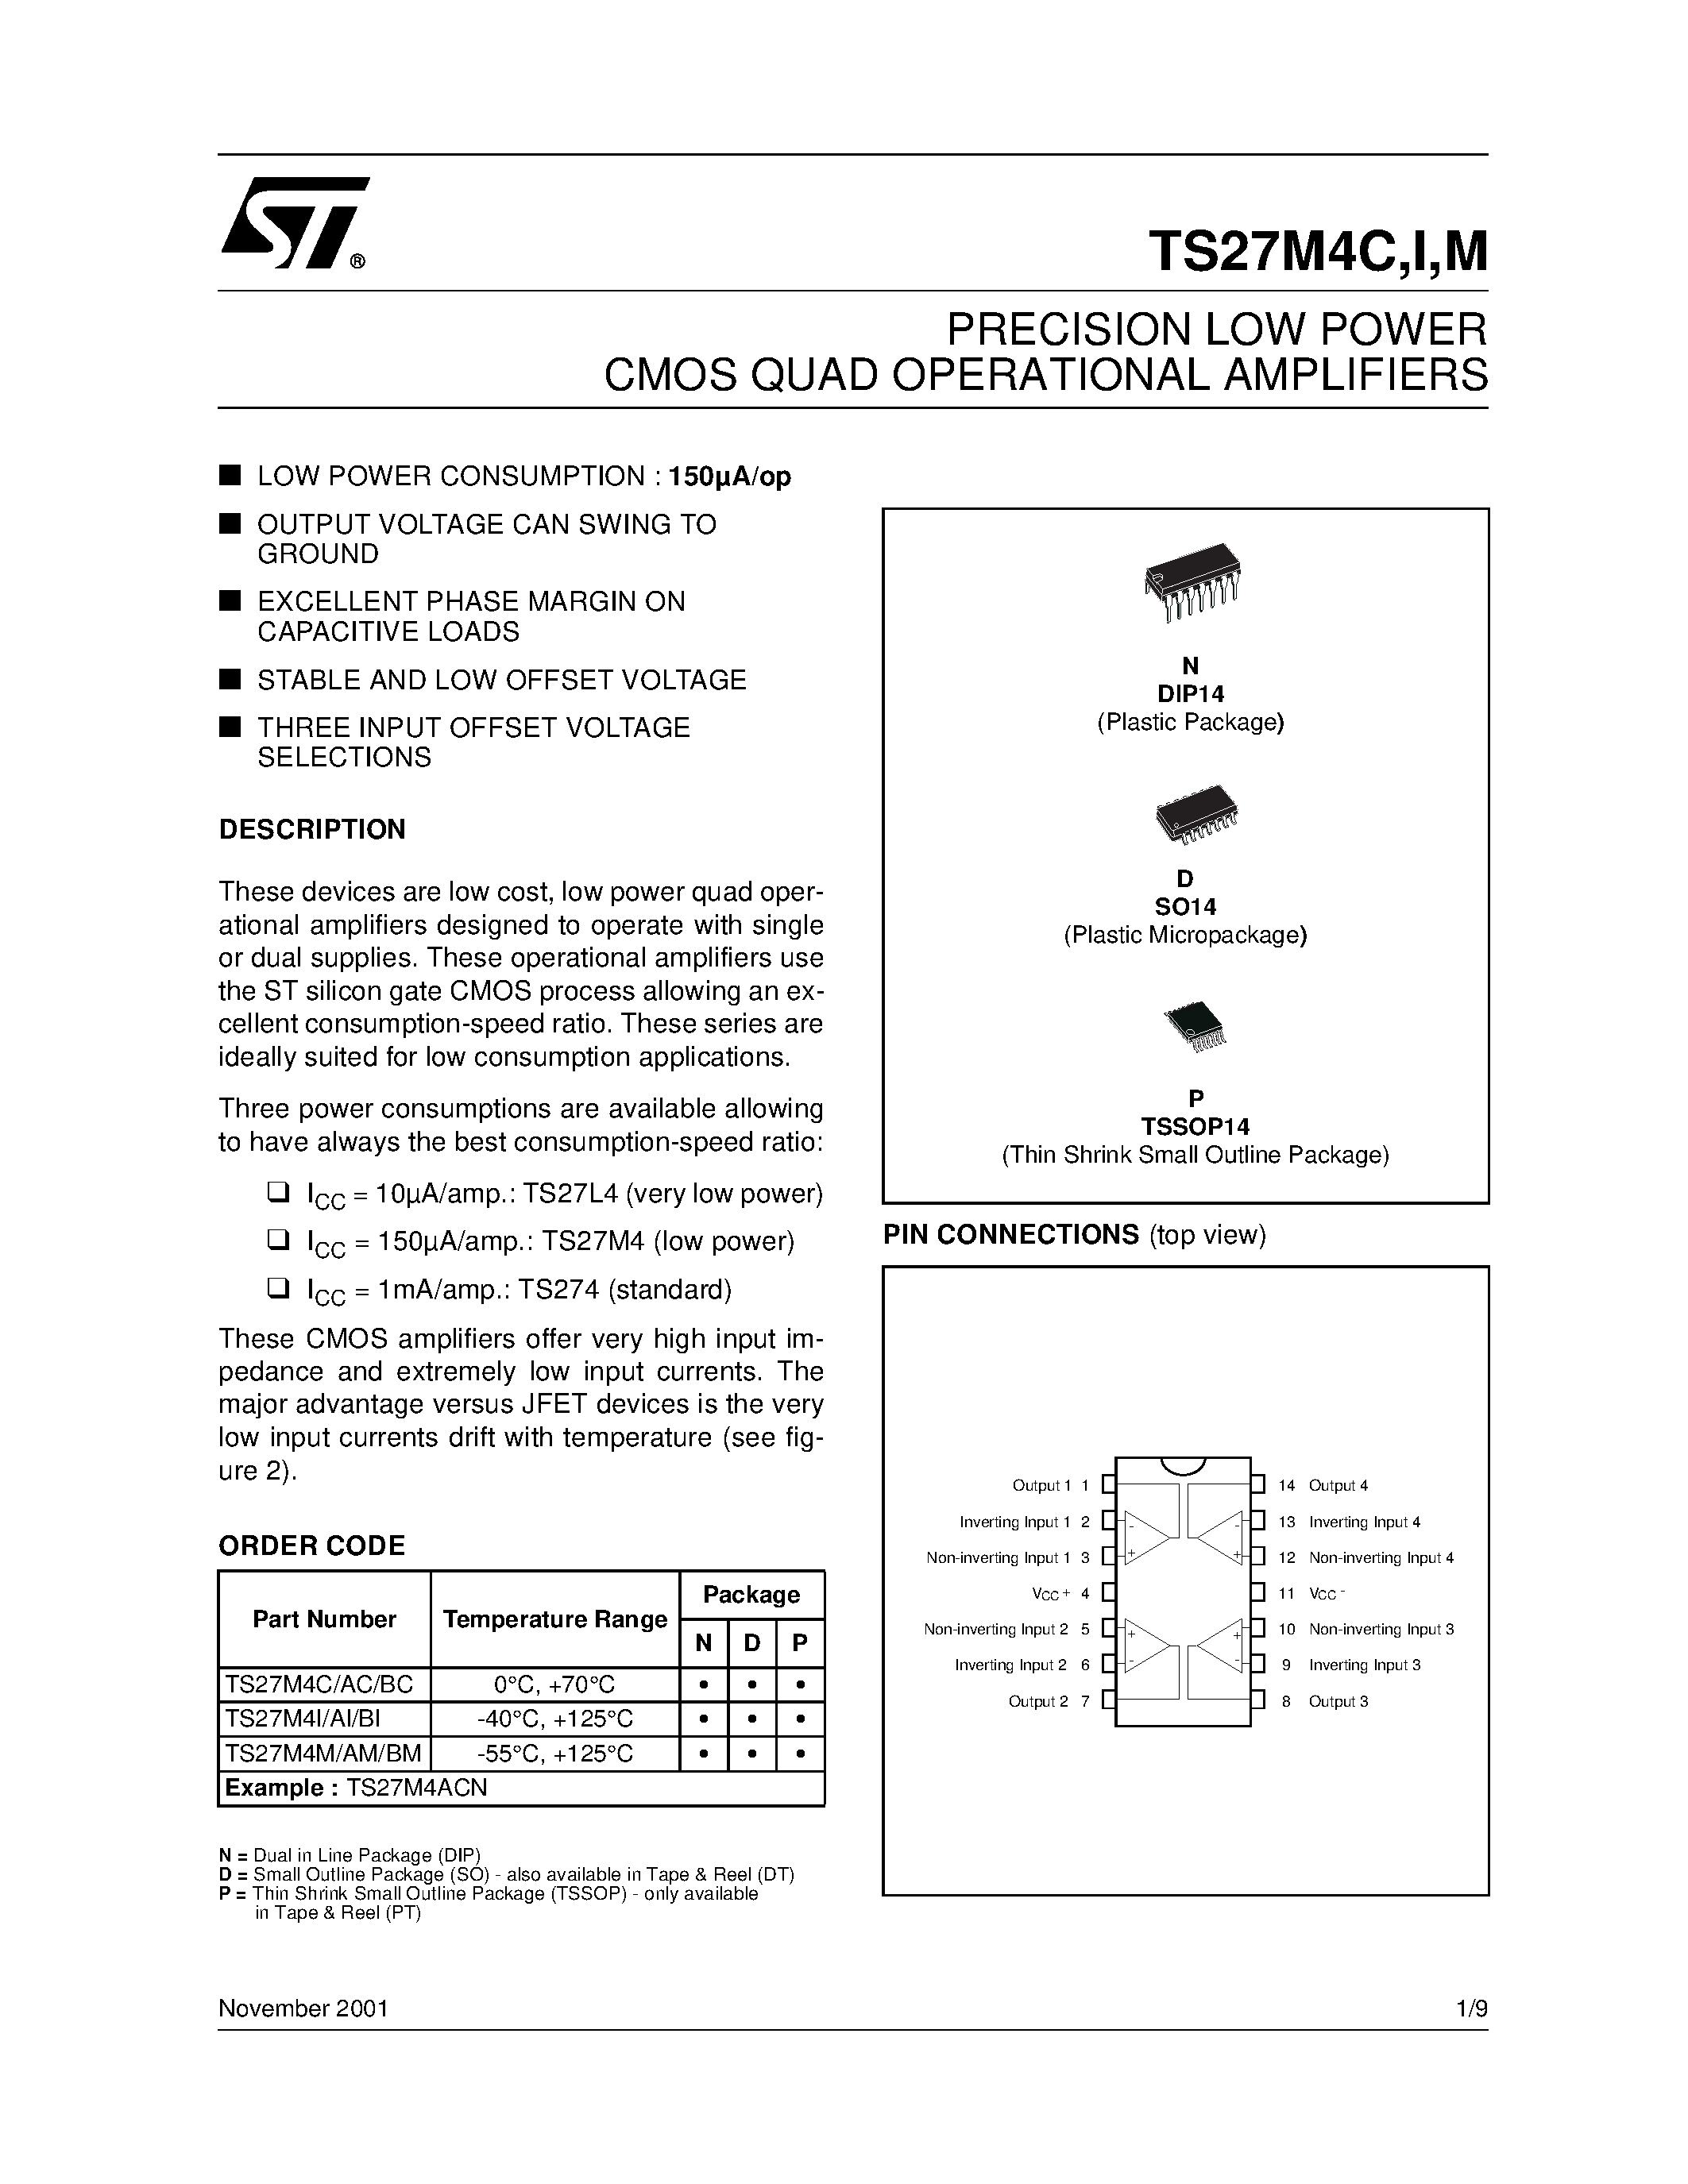 Datasheet TS27M4AC - PRECISION LOW POWER CMOS QUAD OPERATIONAL AMPLIFIERS page 1